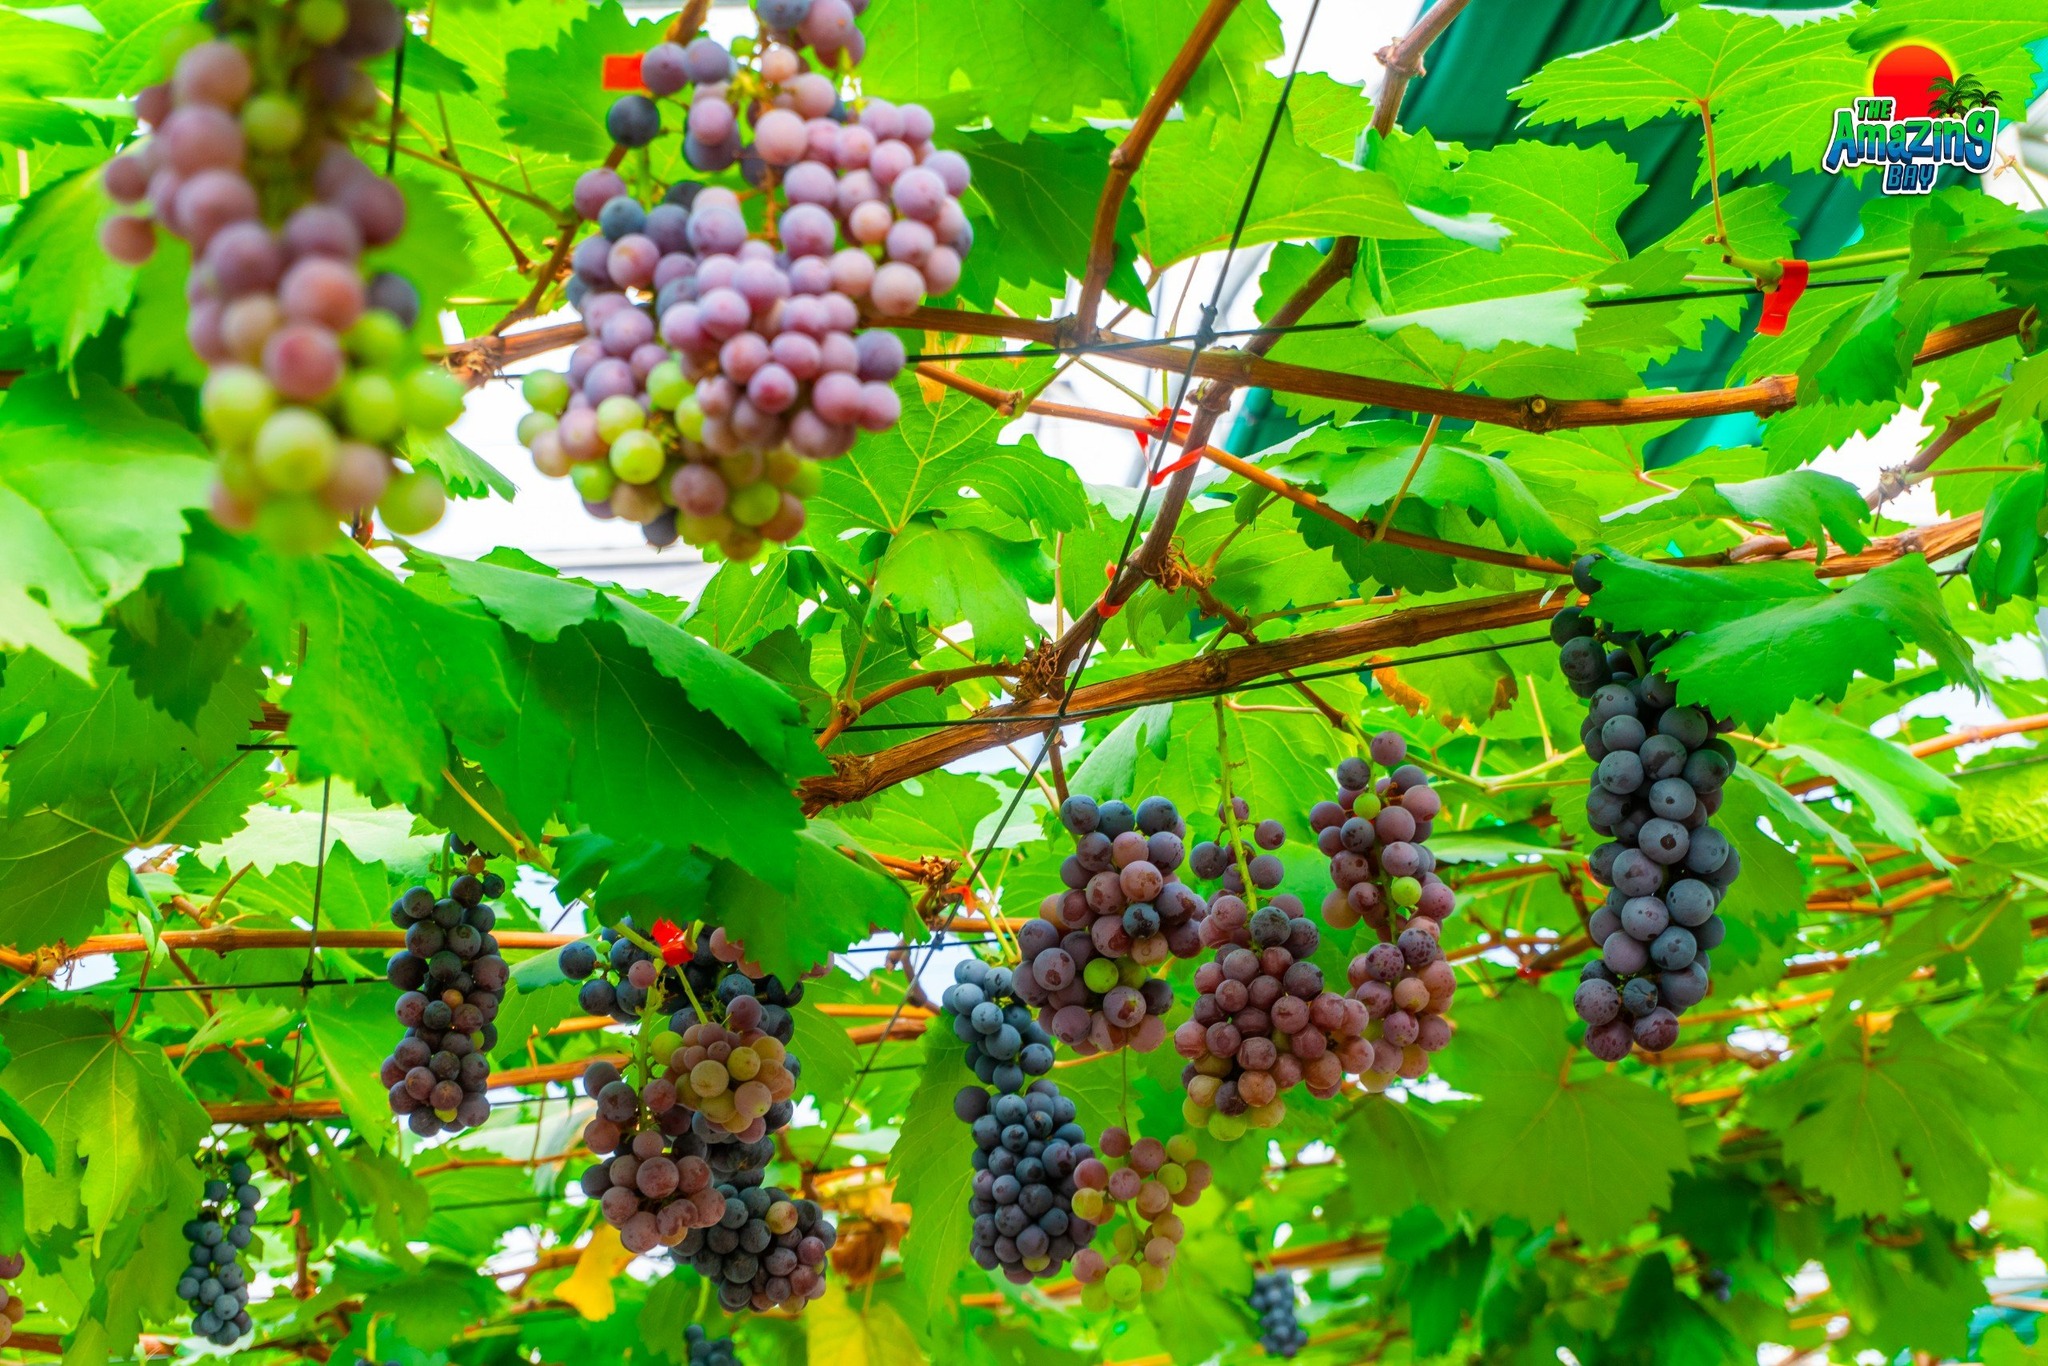 THE GRAPES HAVE ALREADY ripened on their branches.....